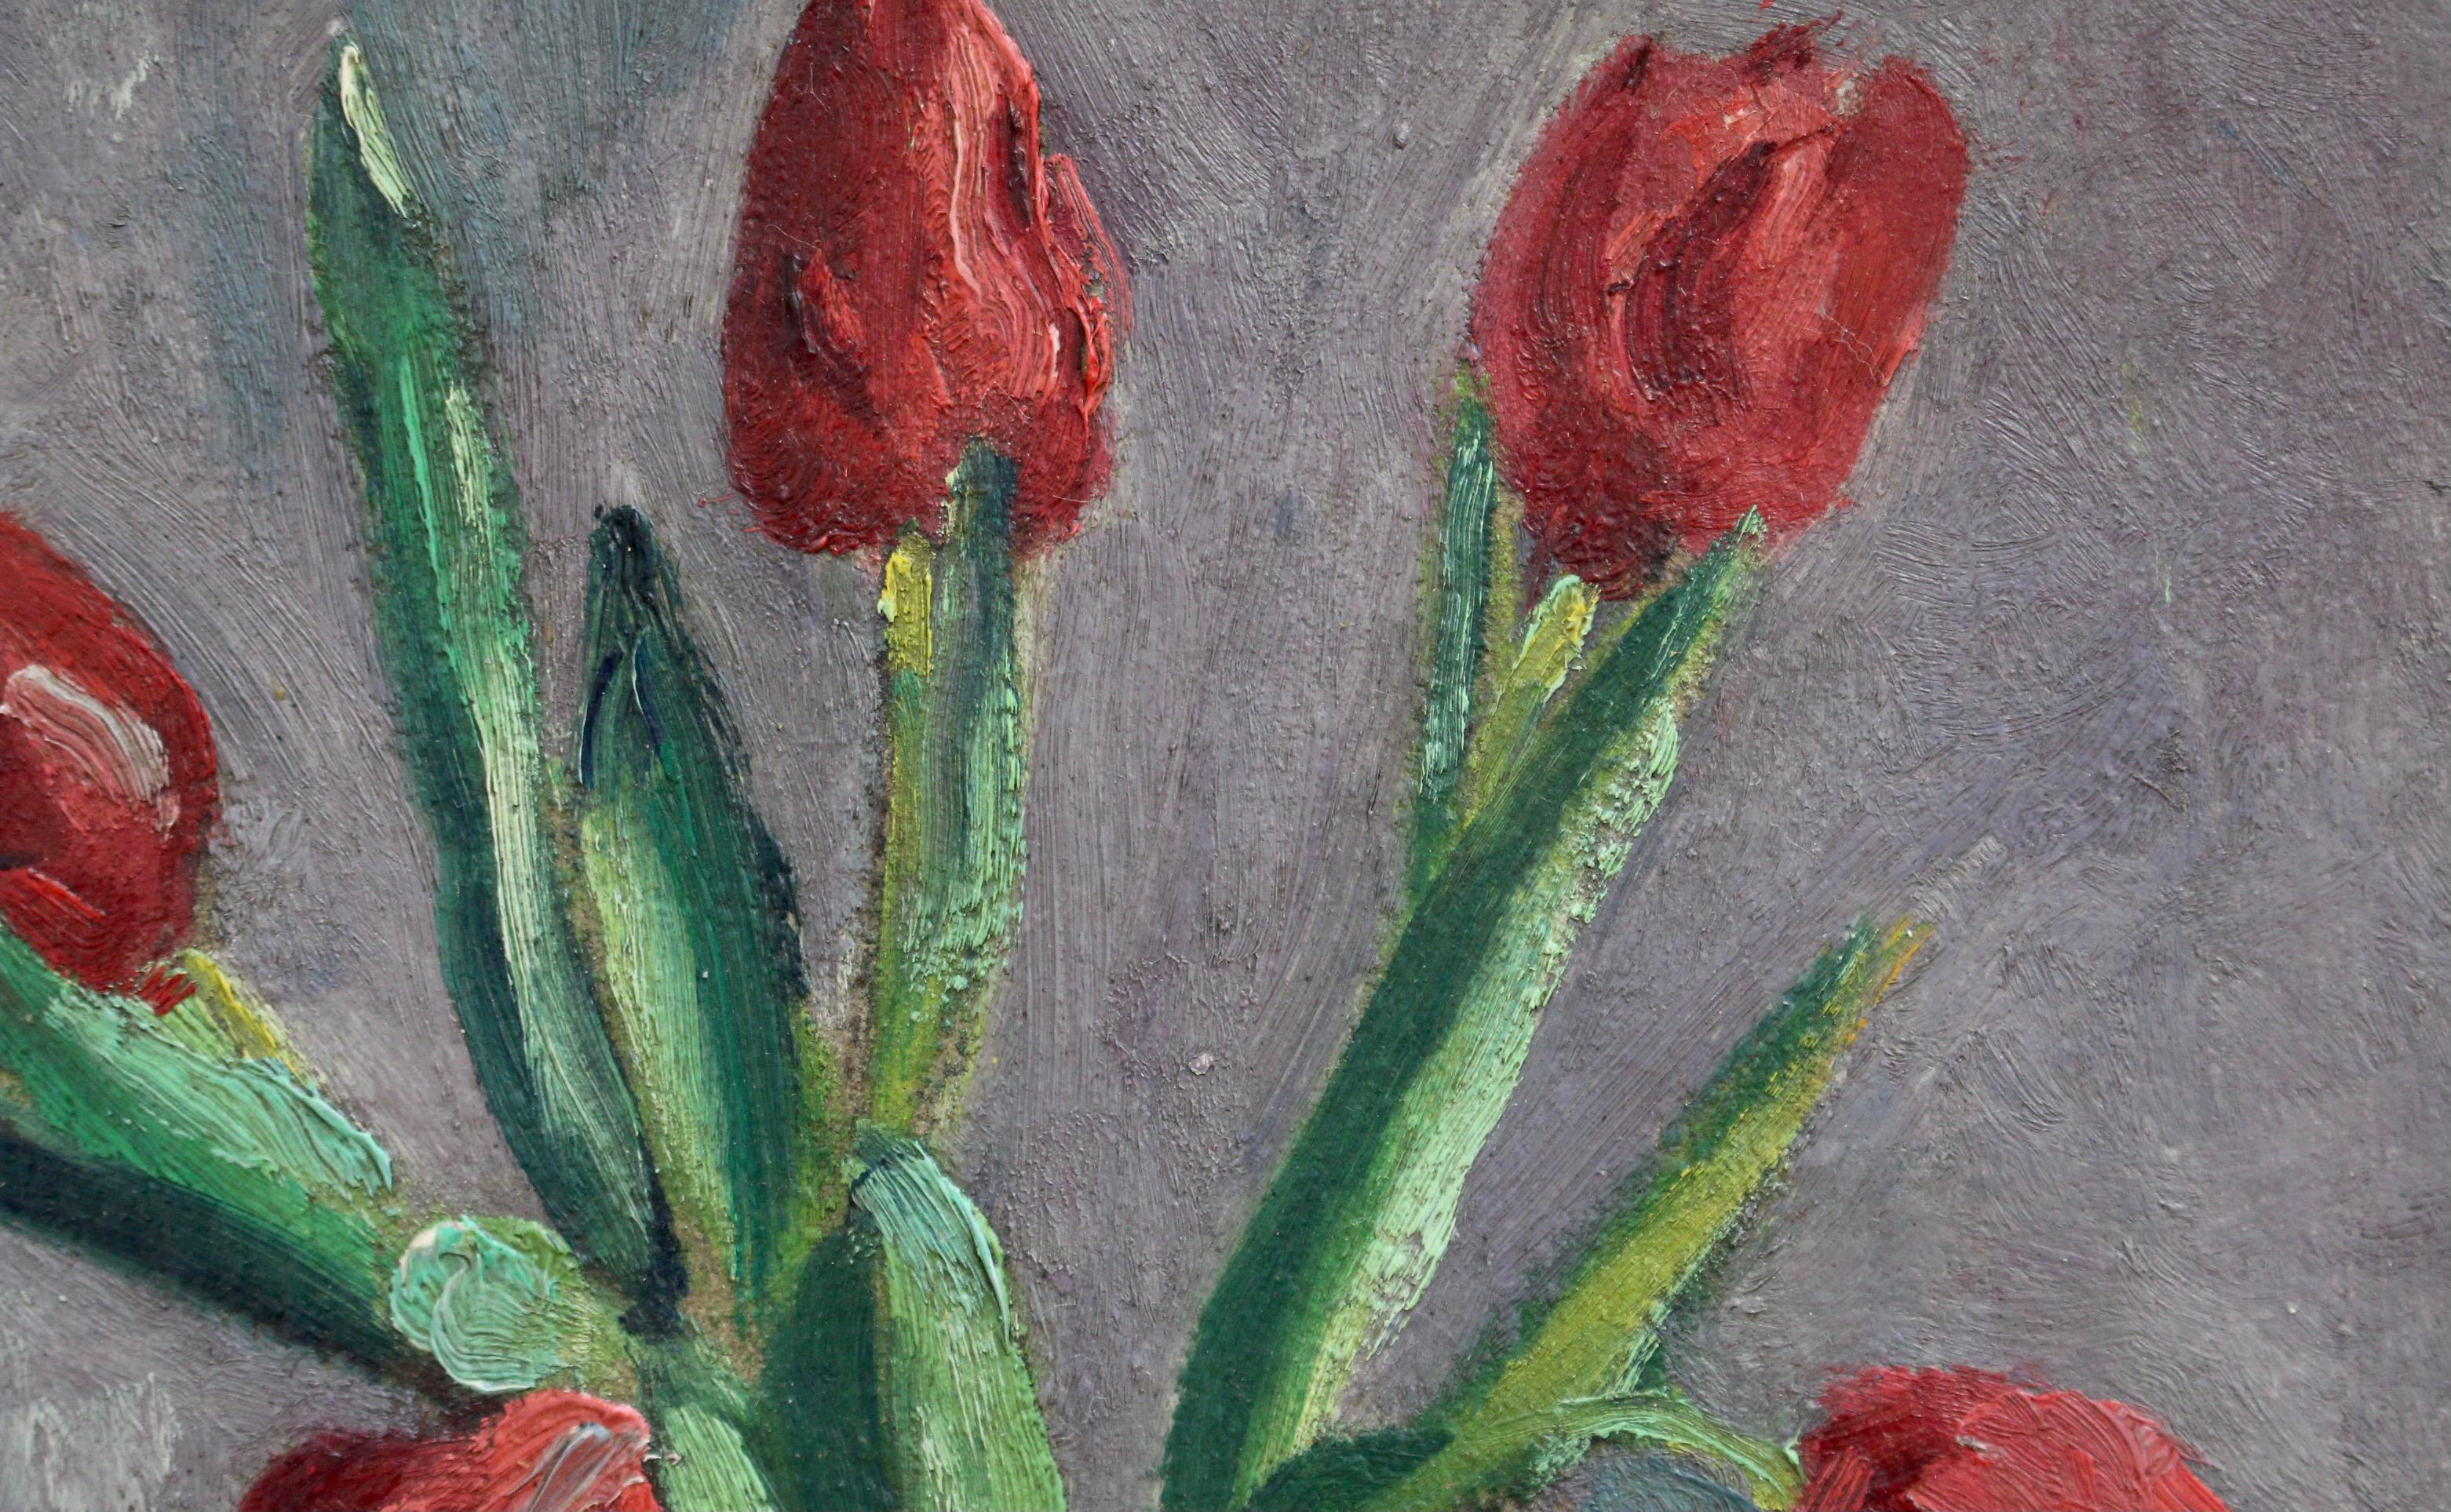 'Vase with Bouquet of Red Tulips', oil on canvas, by Charles Kvapil (circa 1930s). Who doesn't love tulips as a sign of spring, rebirth and hope? The artist did. Placed in a blue vase, tulips inspire one to action, to the outdoors and to the